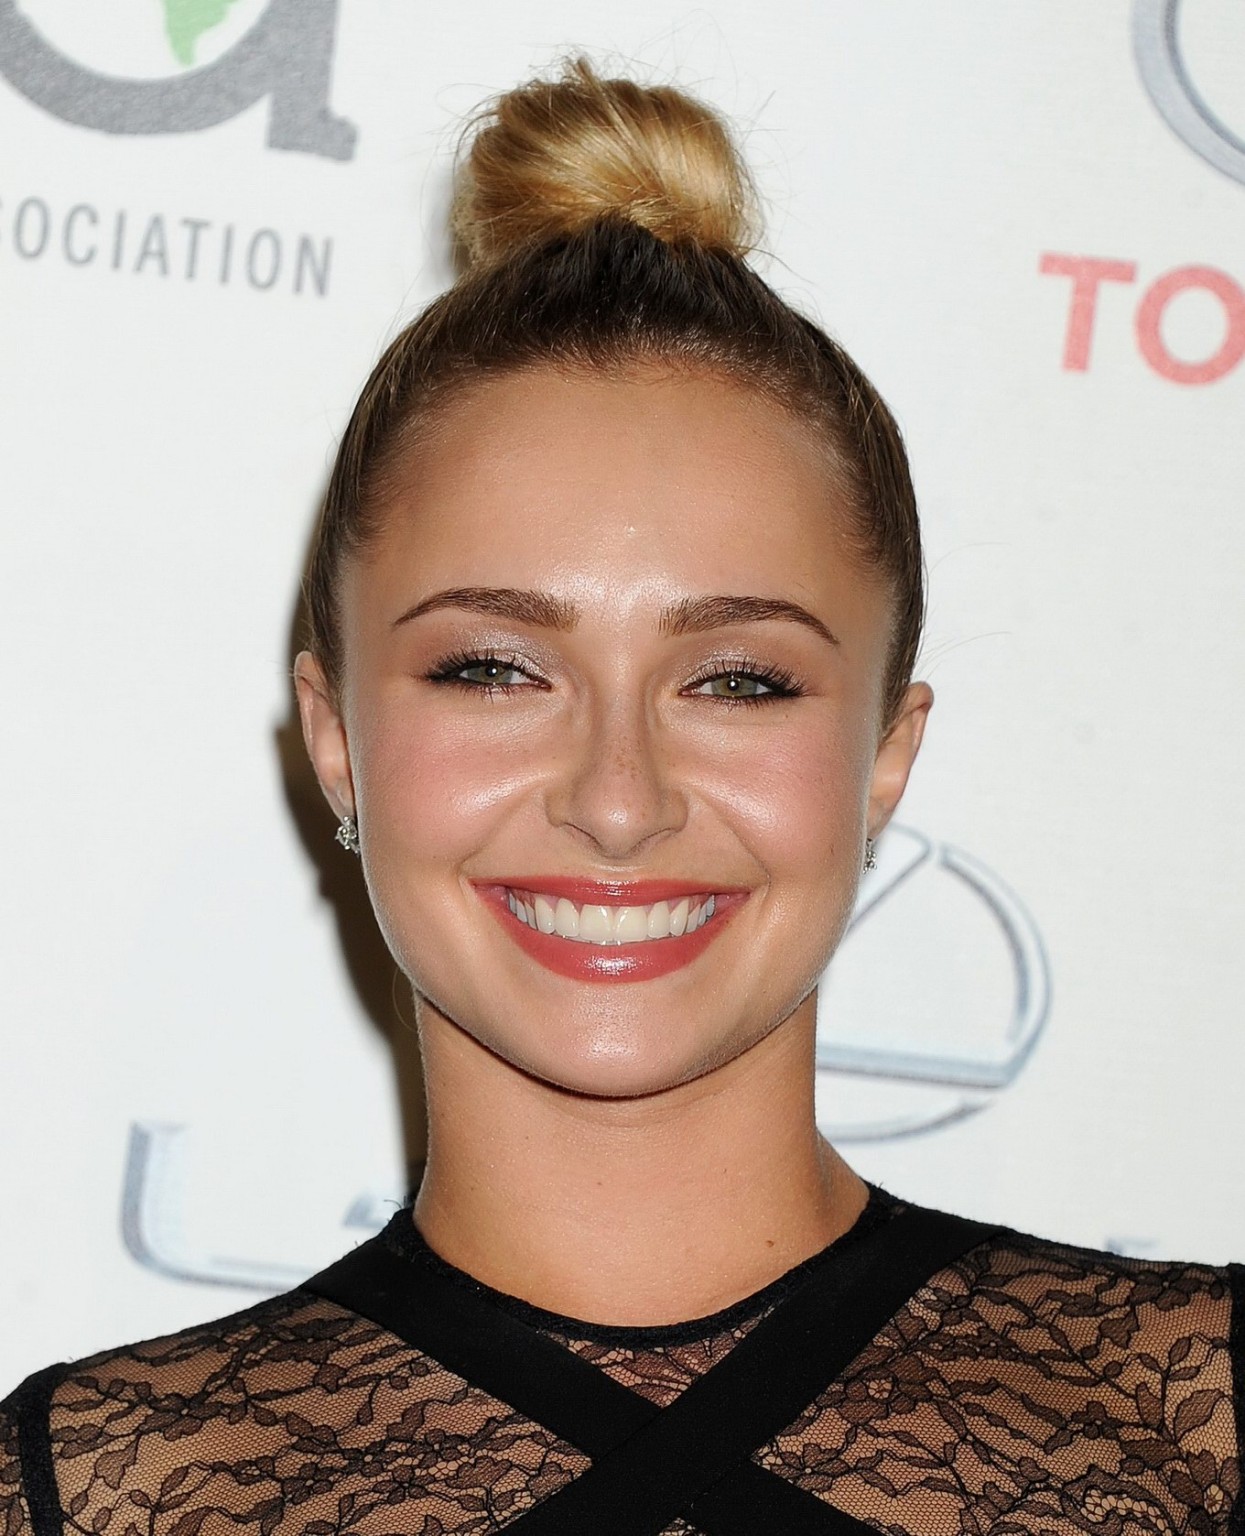 Hayden Panettiere wearing a partially see through dress at the 23rd Annual Envir